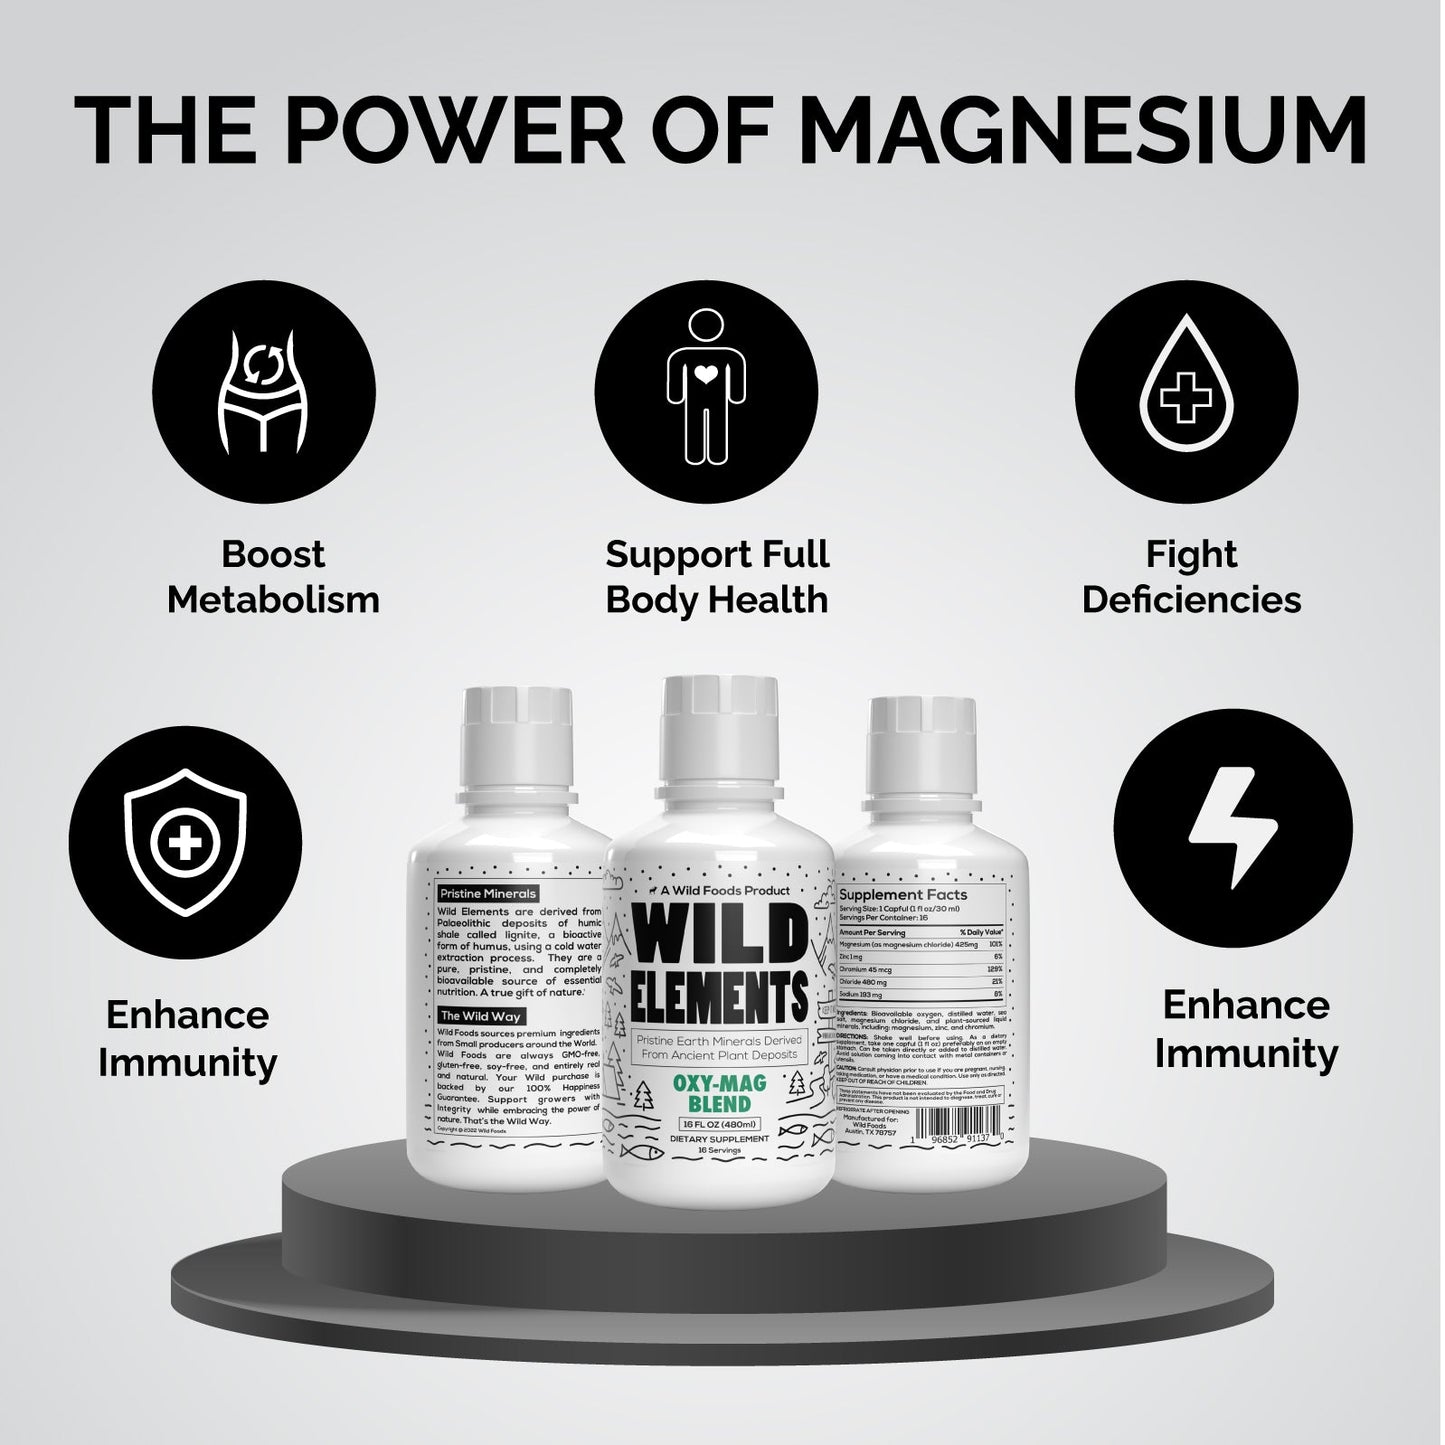 Oxy-Mag: Oxygen & Magnesium Minerals Blend - Case of SIX by Wild Foods